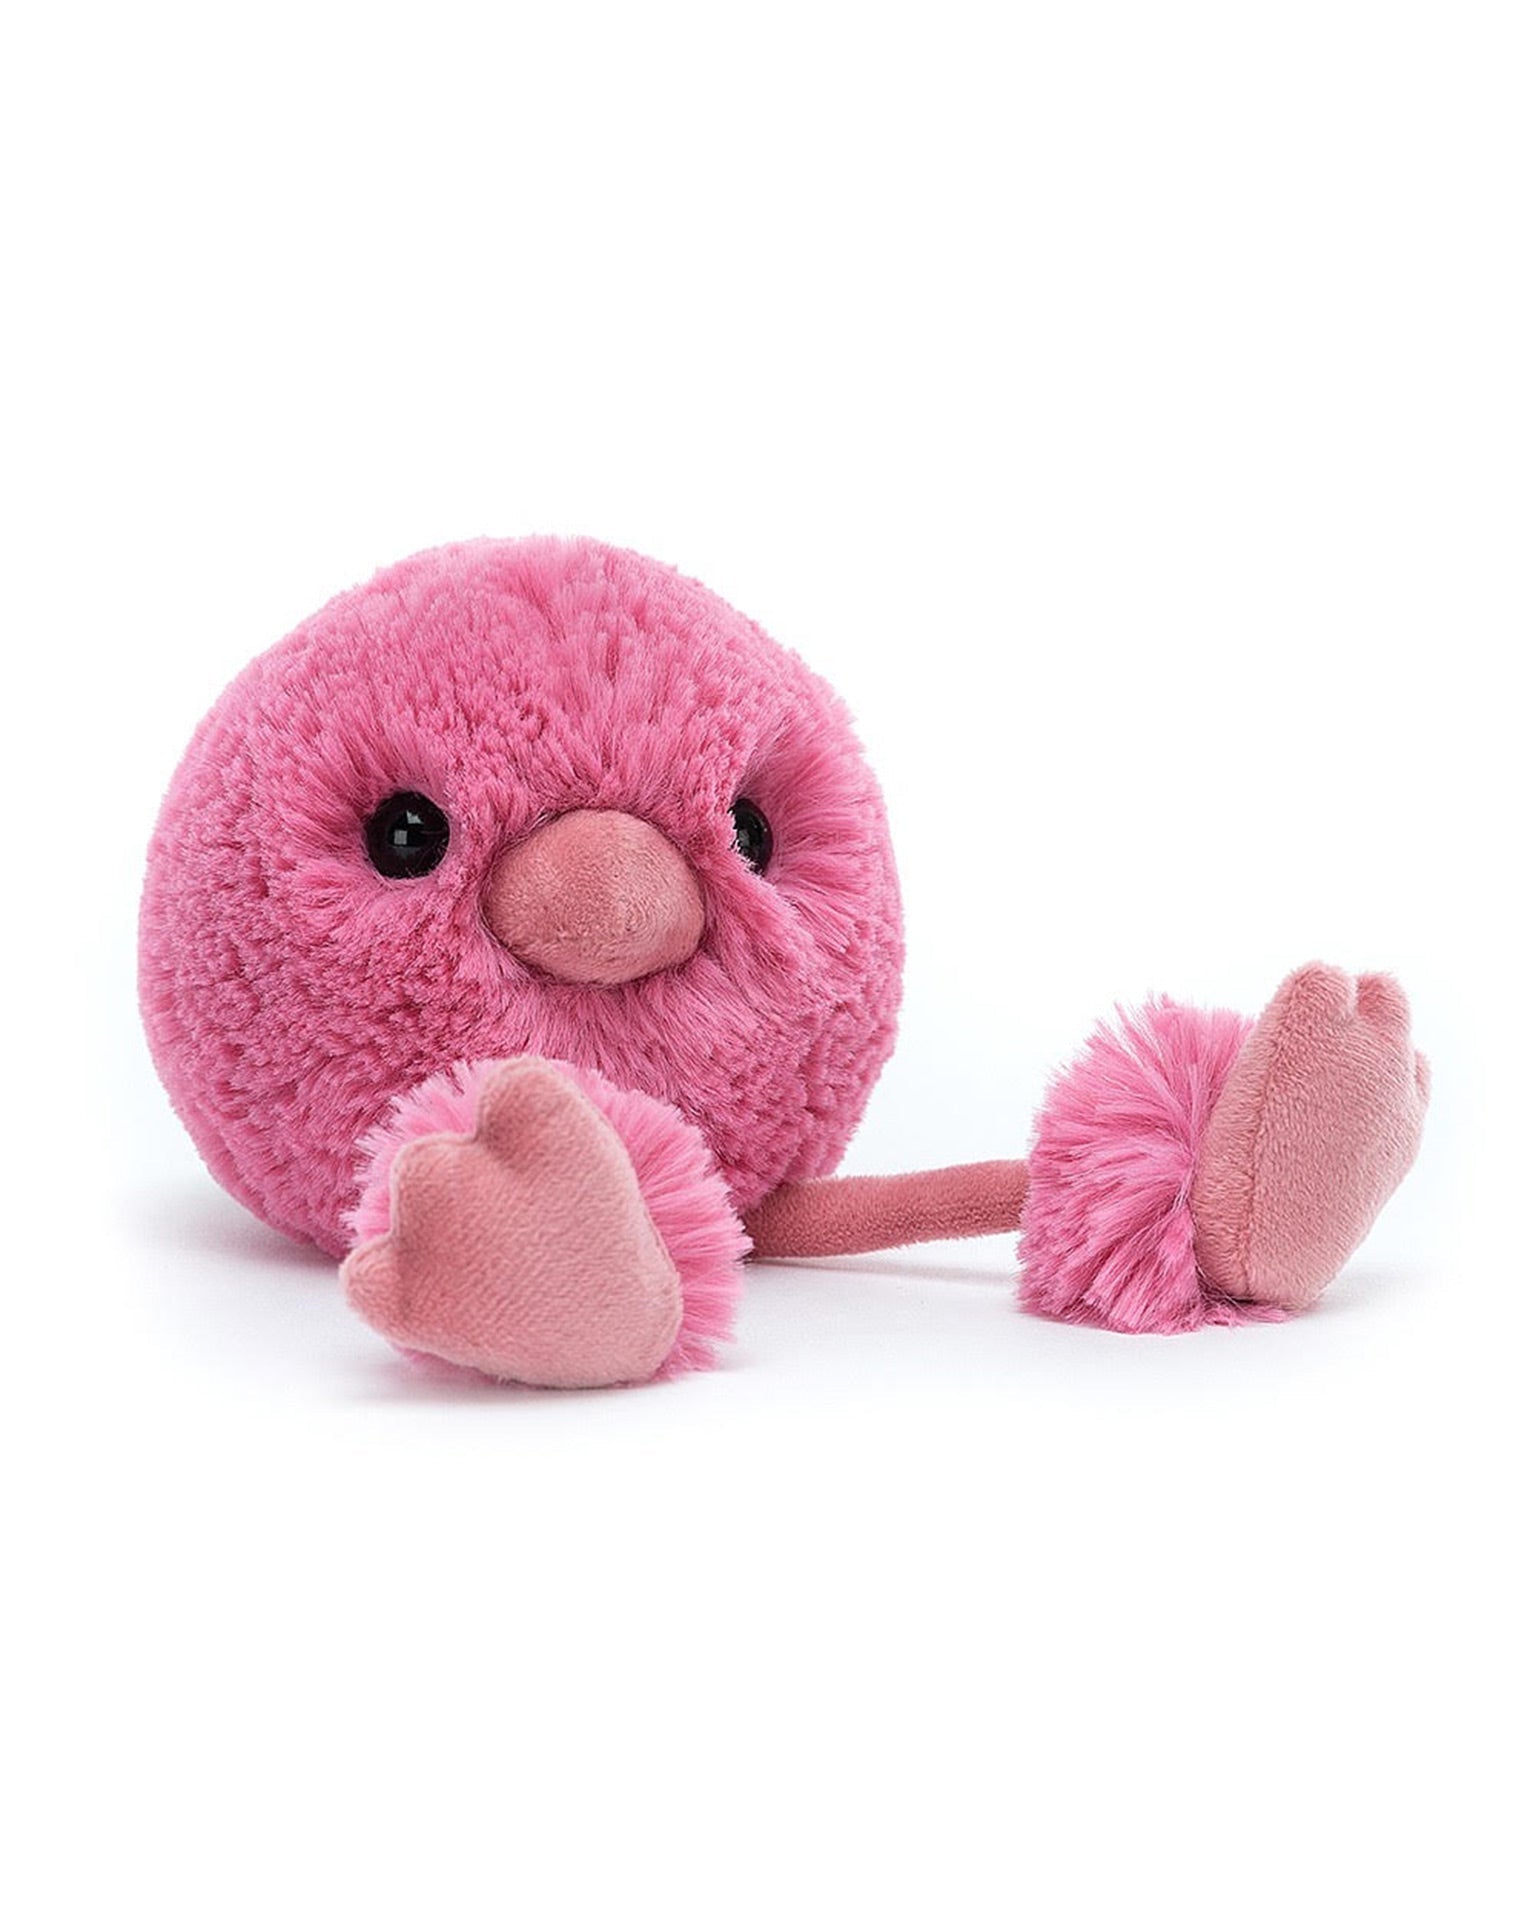 Little jellycat play zingy chick pink